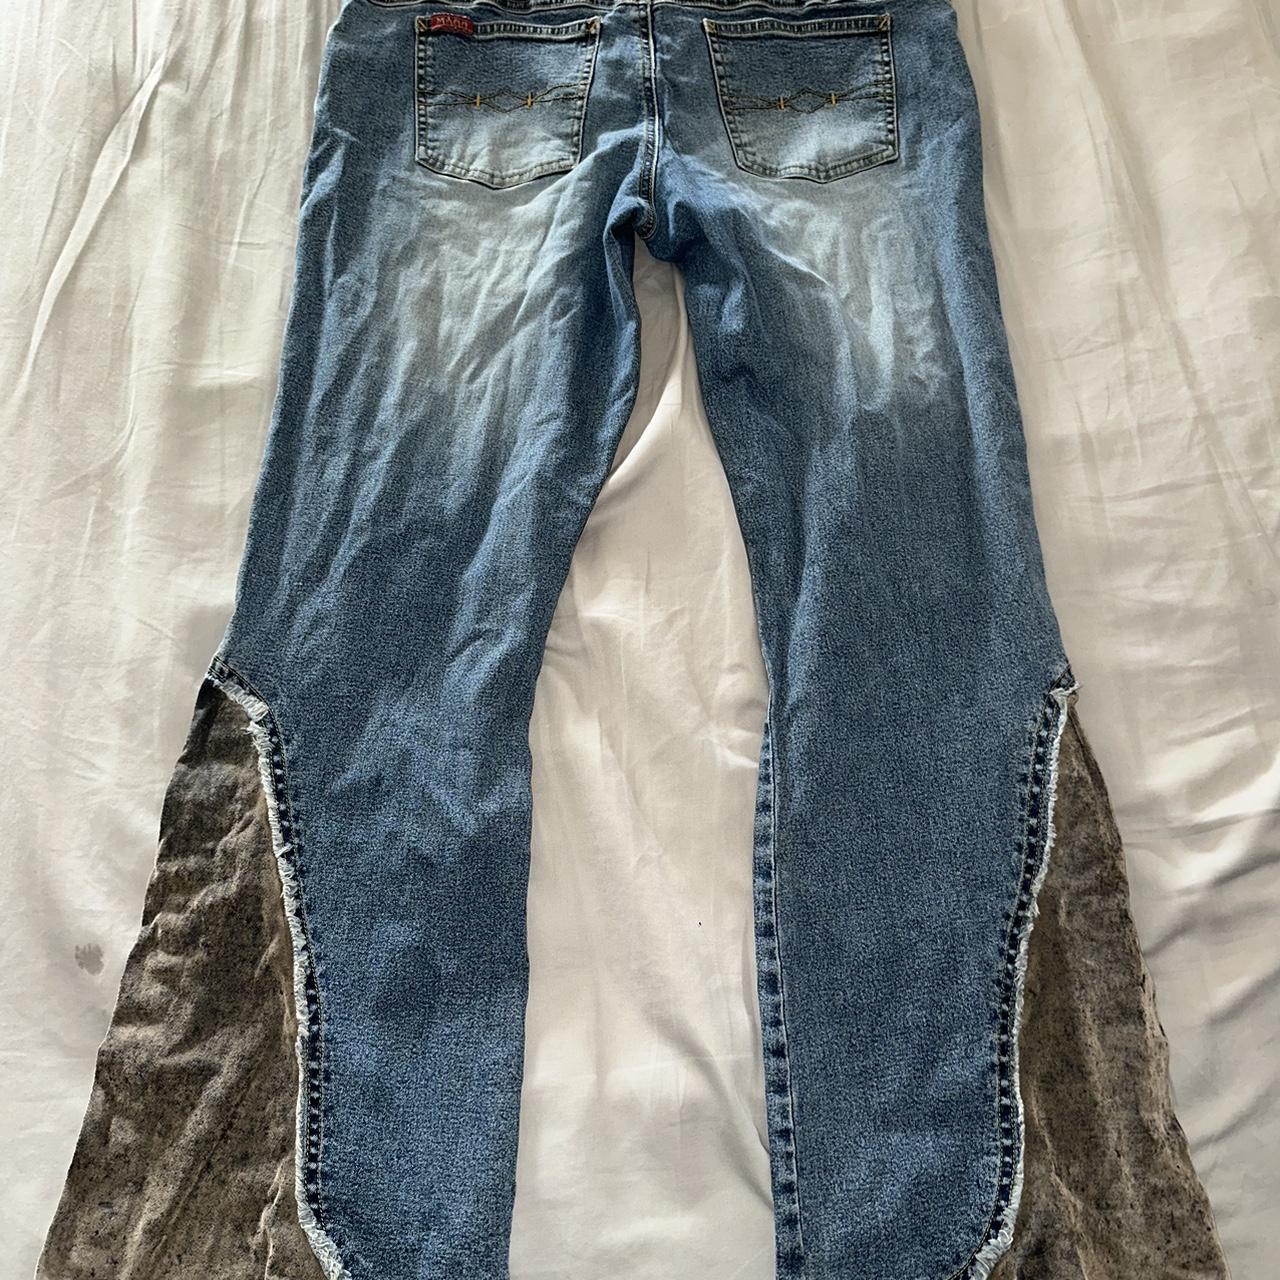 Mudd jeans with suede detailing and bronze... - Depop